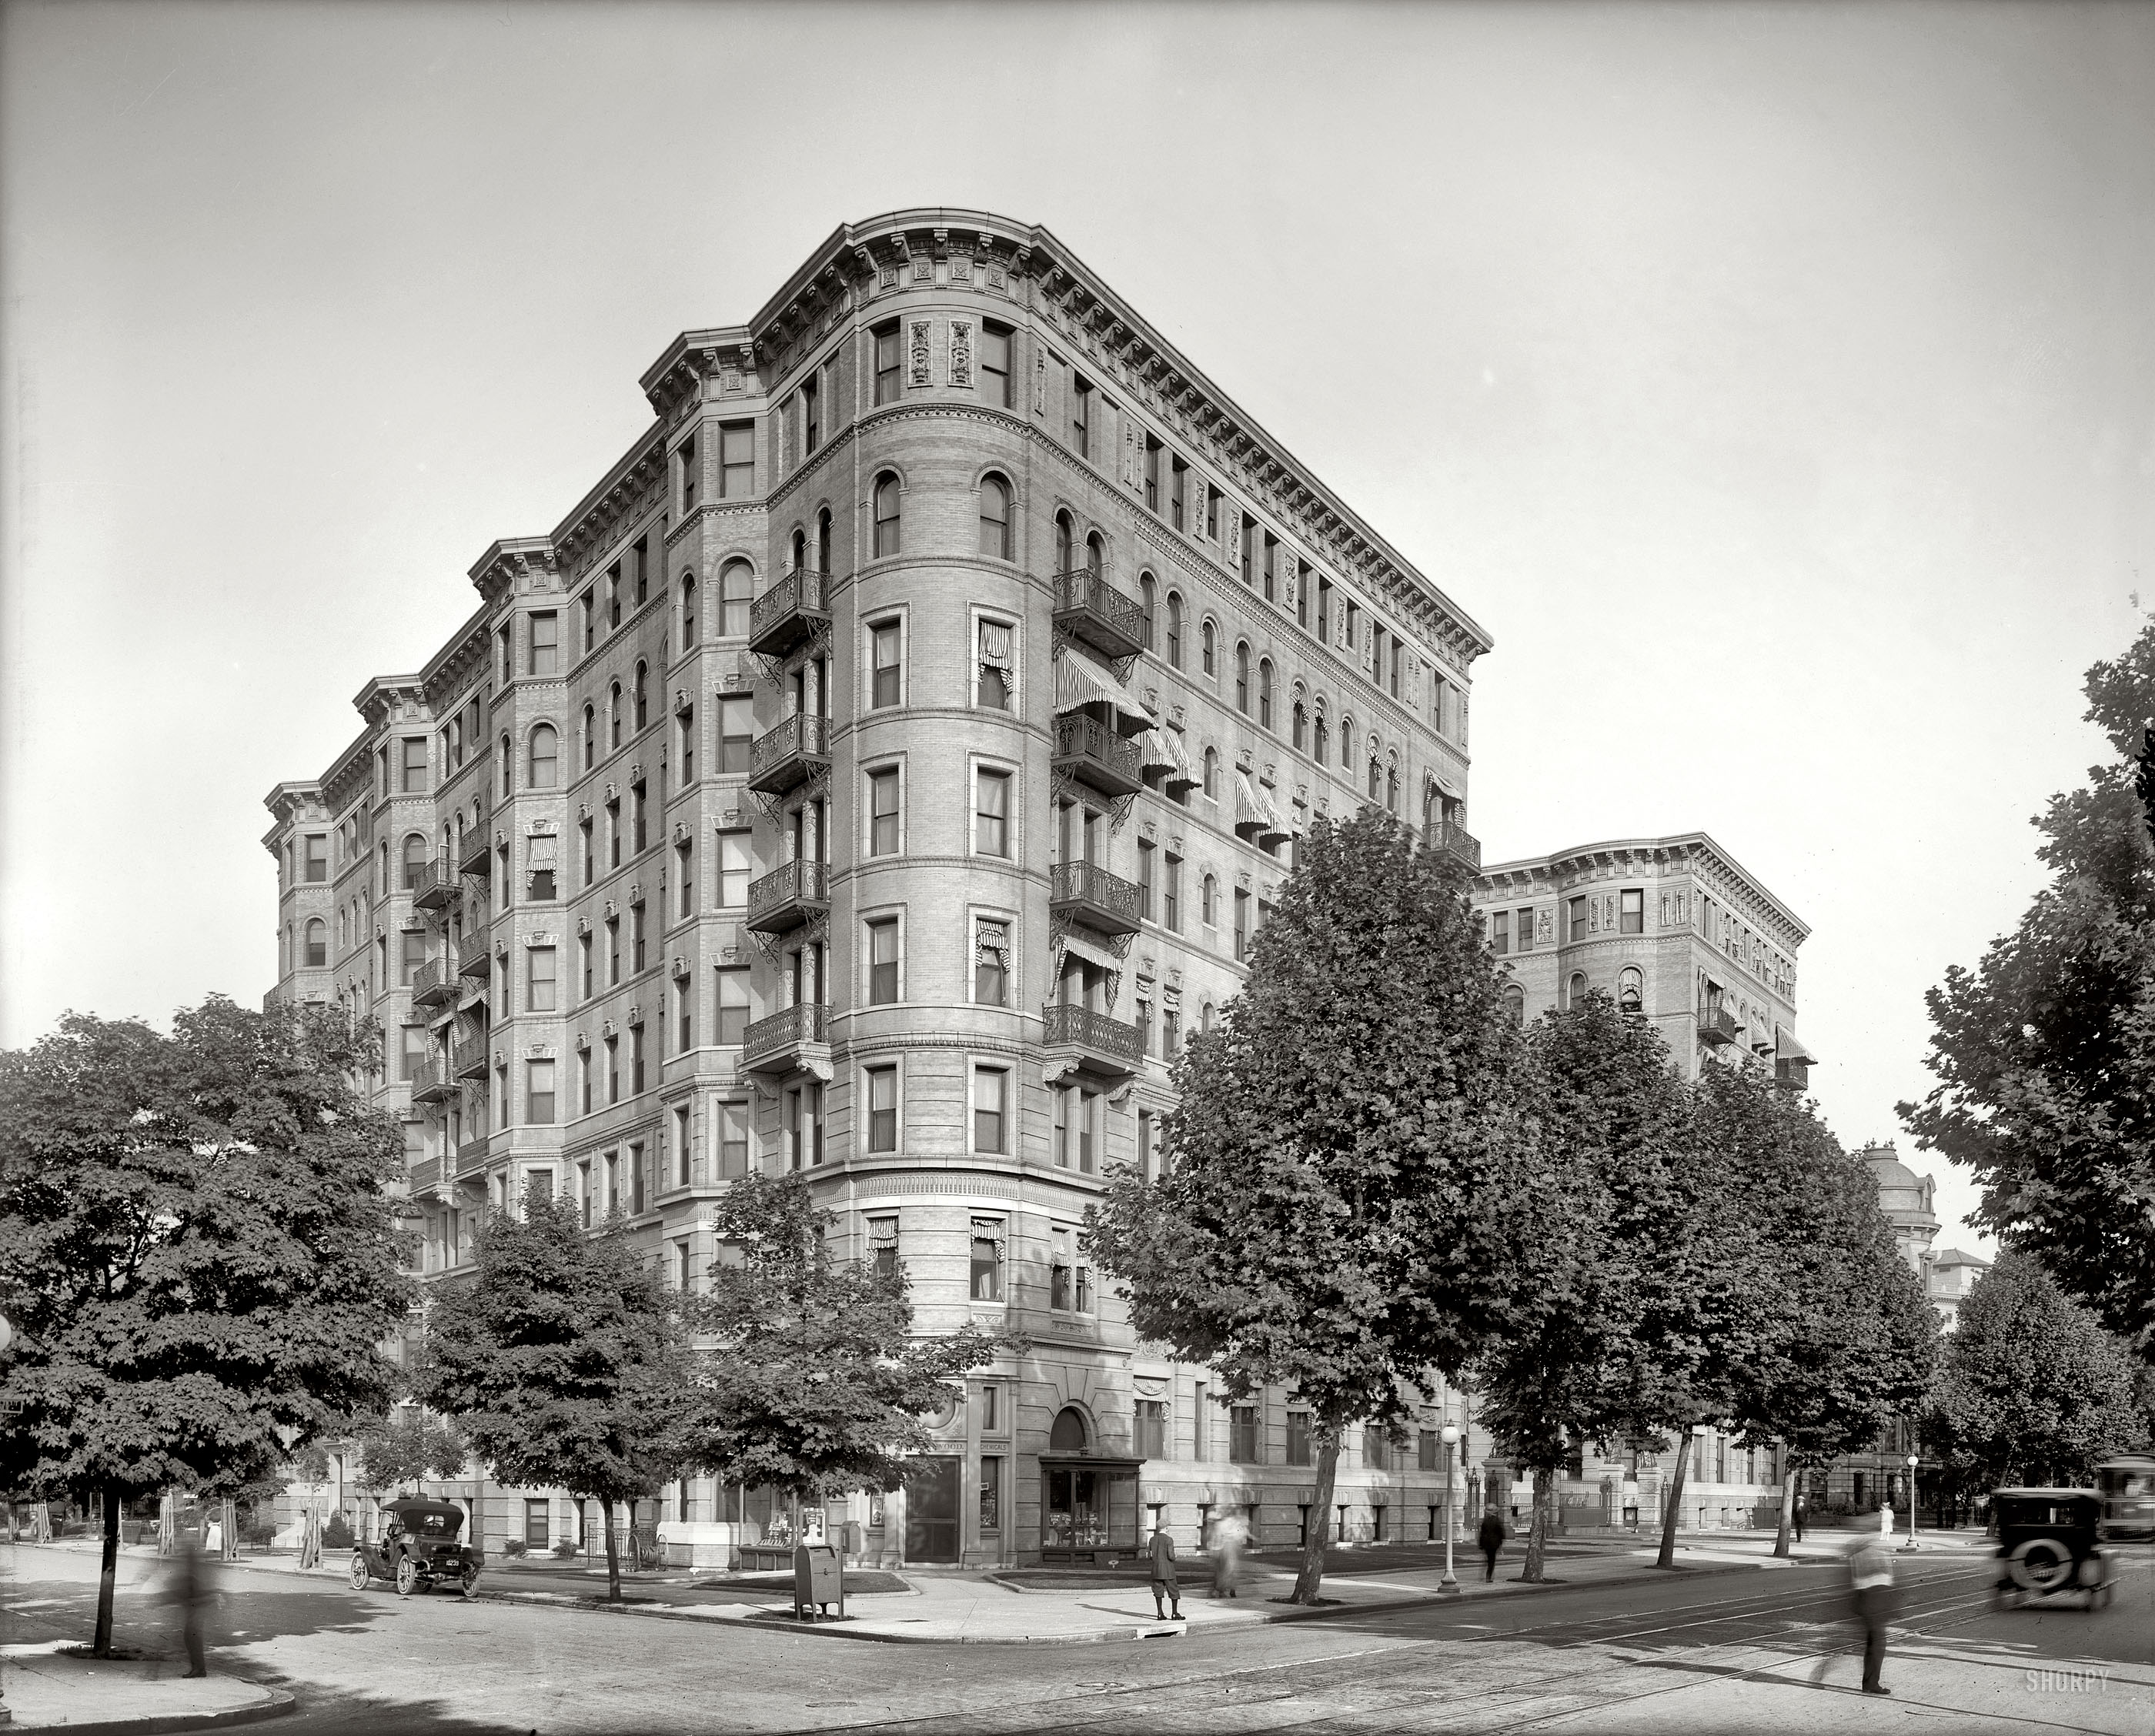 Washington, D.C., circa 1925. "Stoneleigh Court." Passers-by, frozen in time. National Photo Company Collection glass negative. View full size.